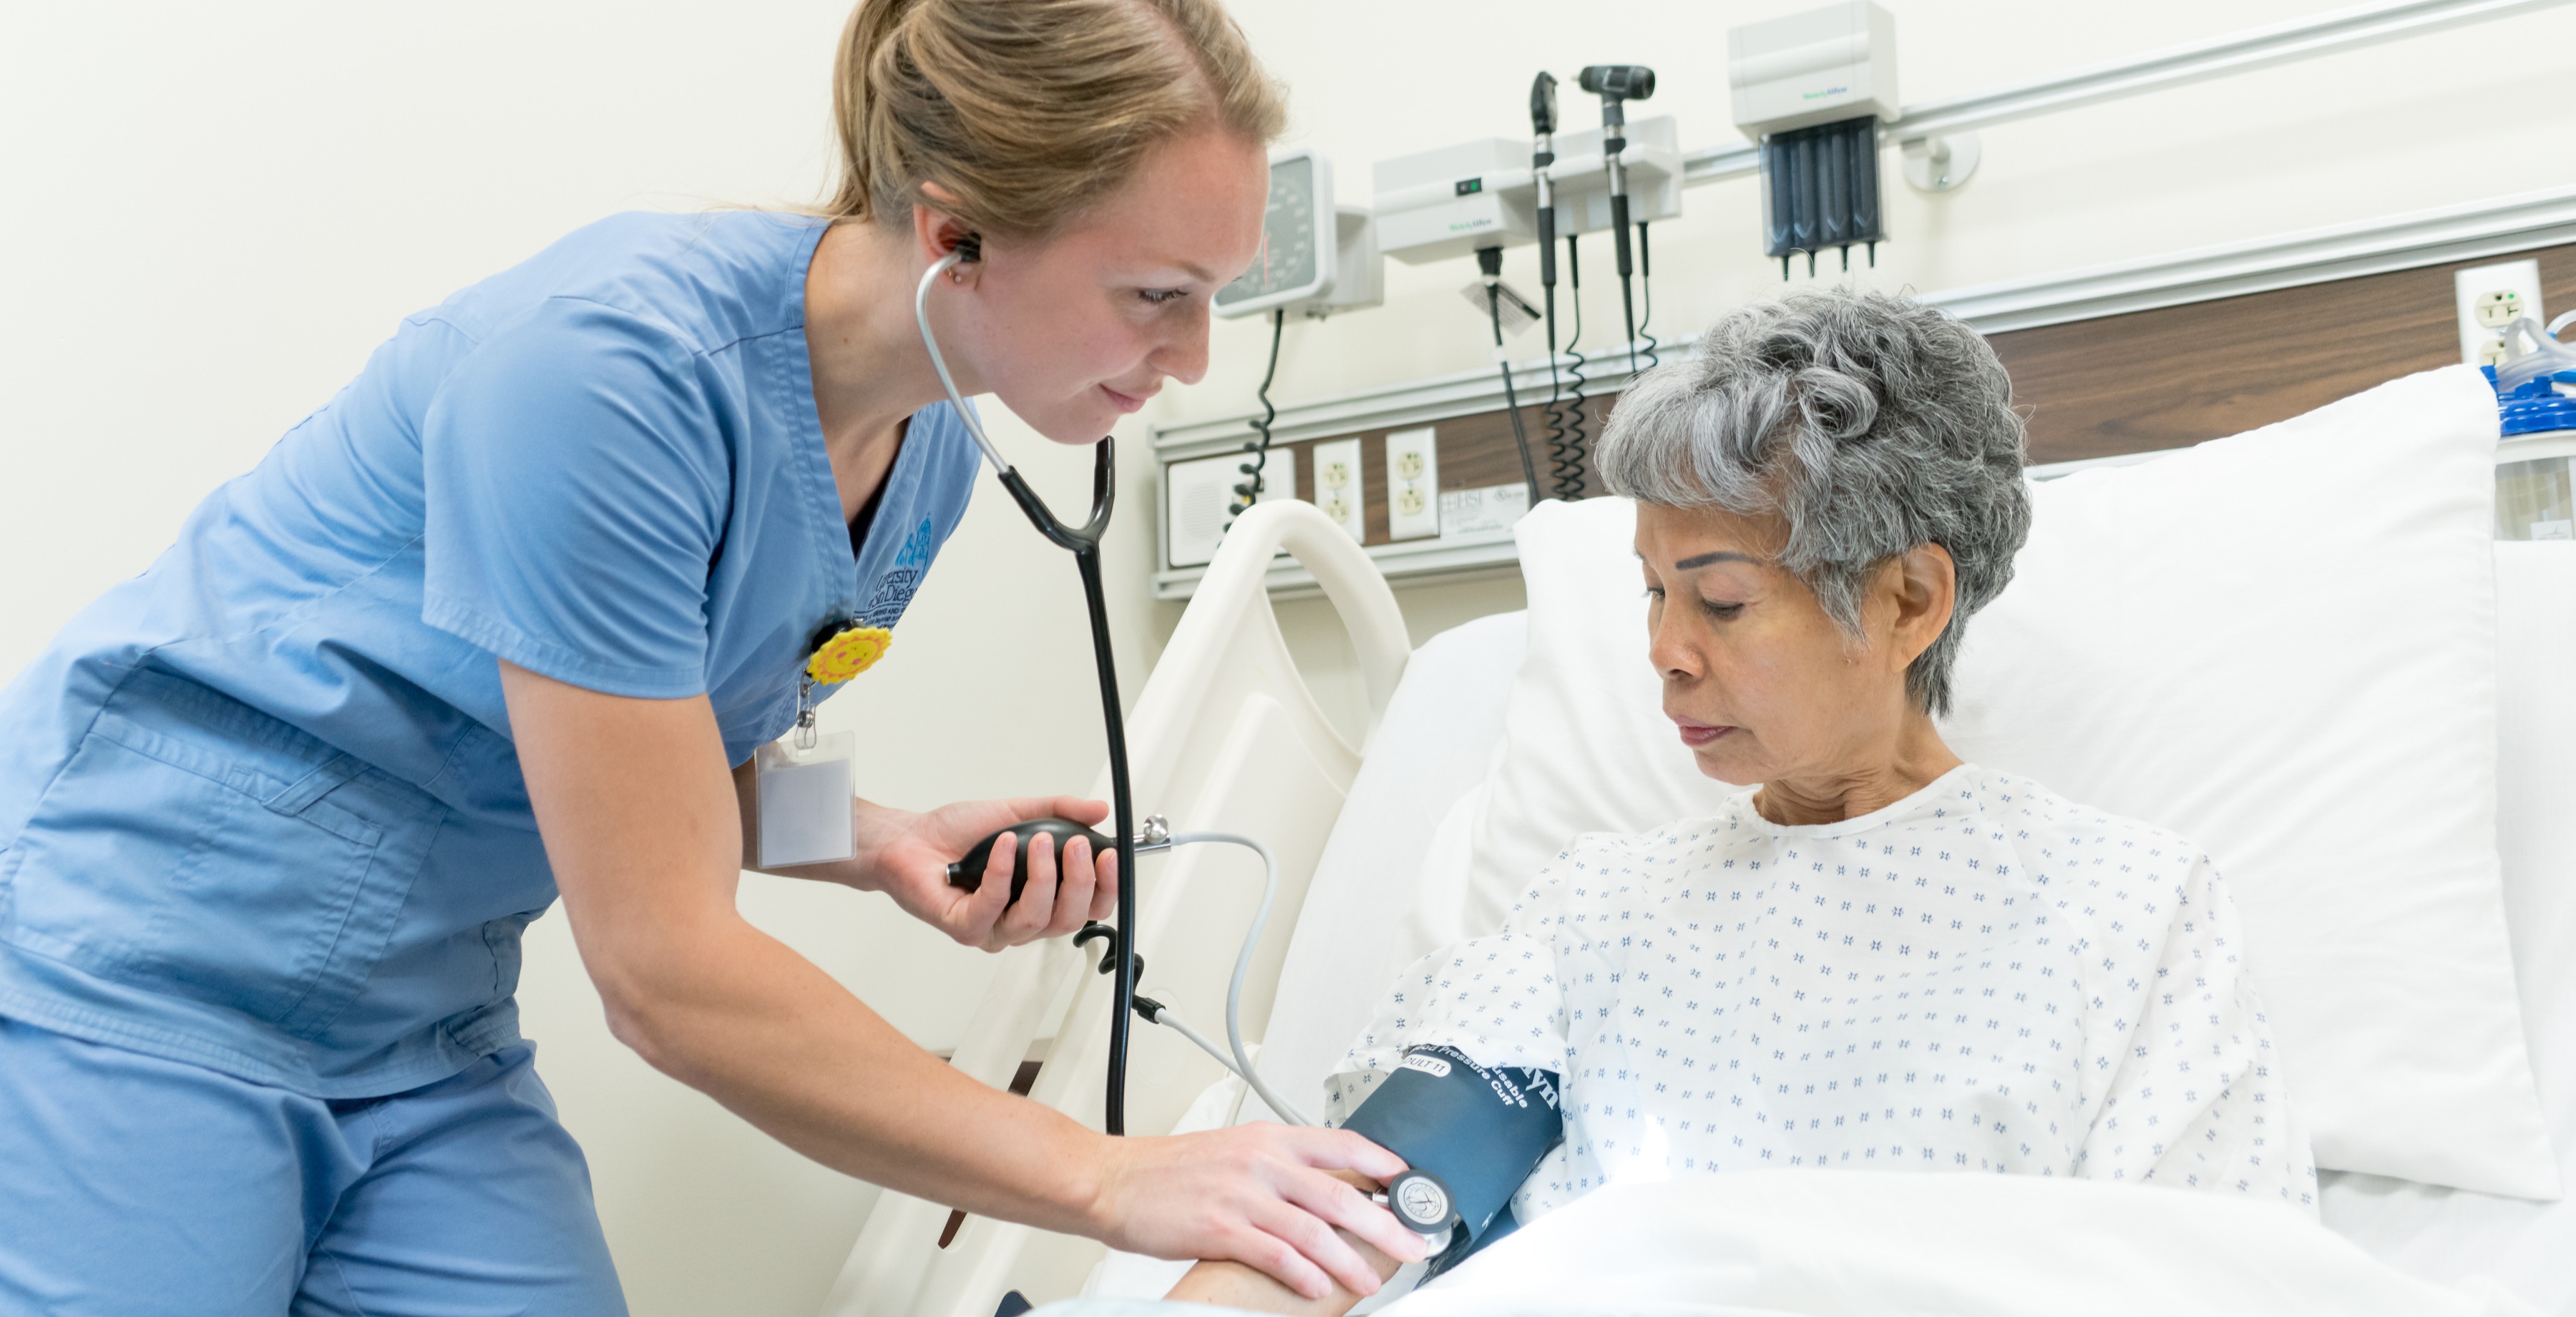 A Look Into the Role of a Clinical Nurse Specialist